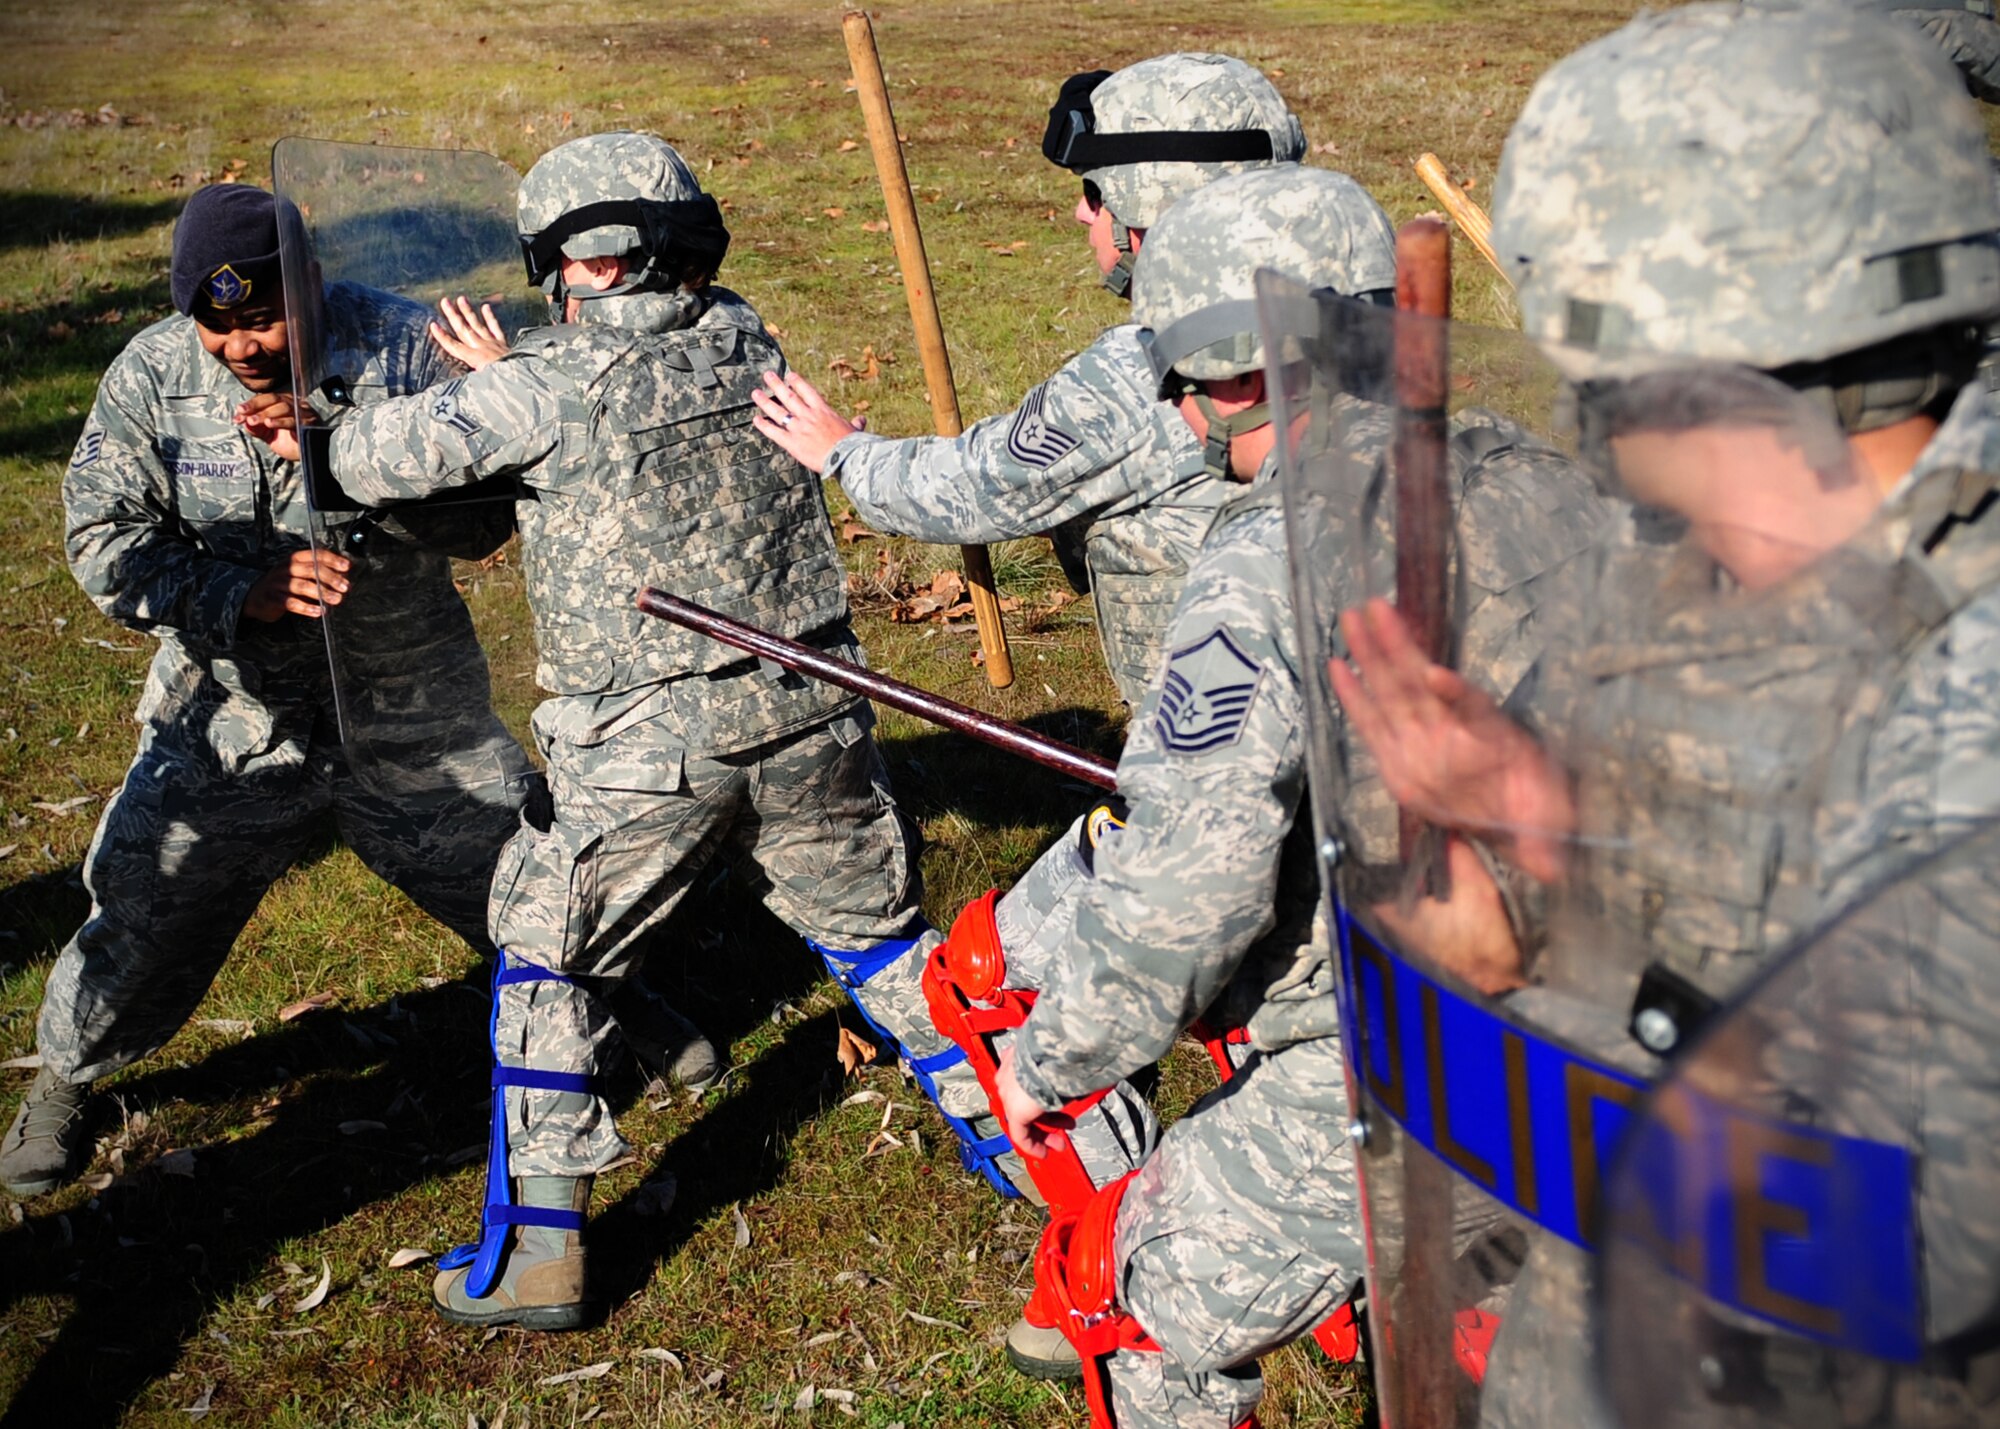 Patrolmen from the 9th Security Forces Squadron subdue a simulated suspect during civil disturbance training at Beale Air Force Base, Calif., Jan. 25, 2013. The squadron trains constantly to stay proficient in base defense. (U.S. Air Force photo by Senior Airman Shawn Nickel/Released)